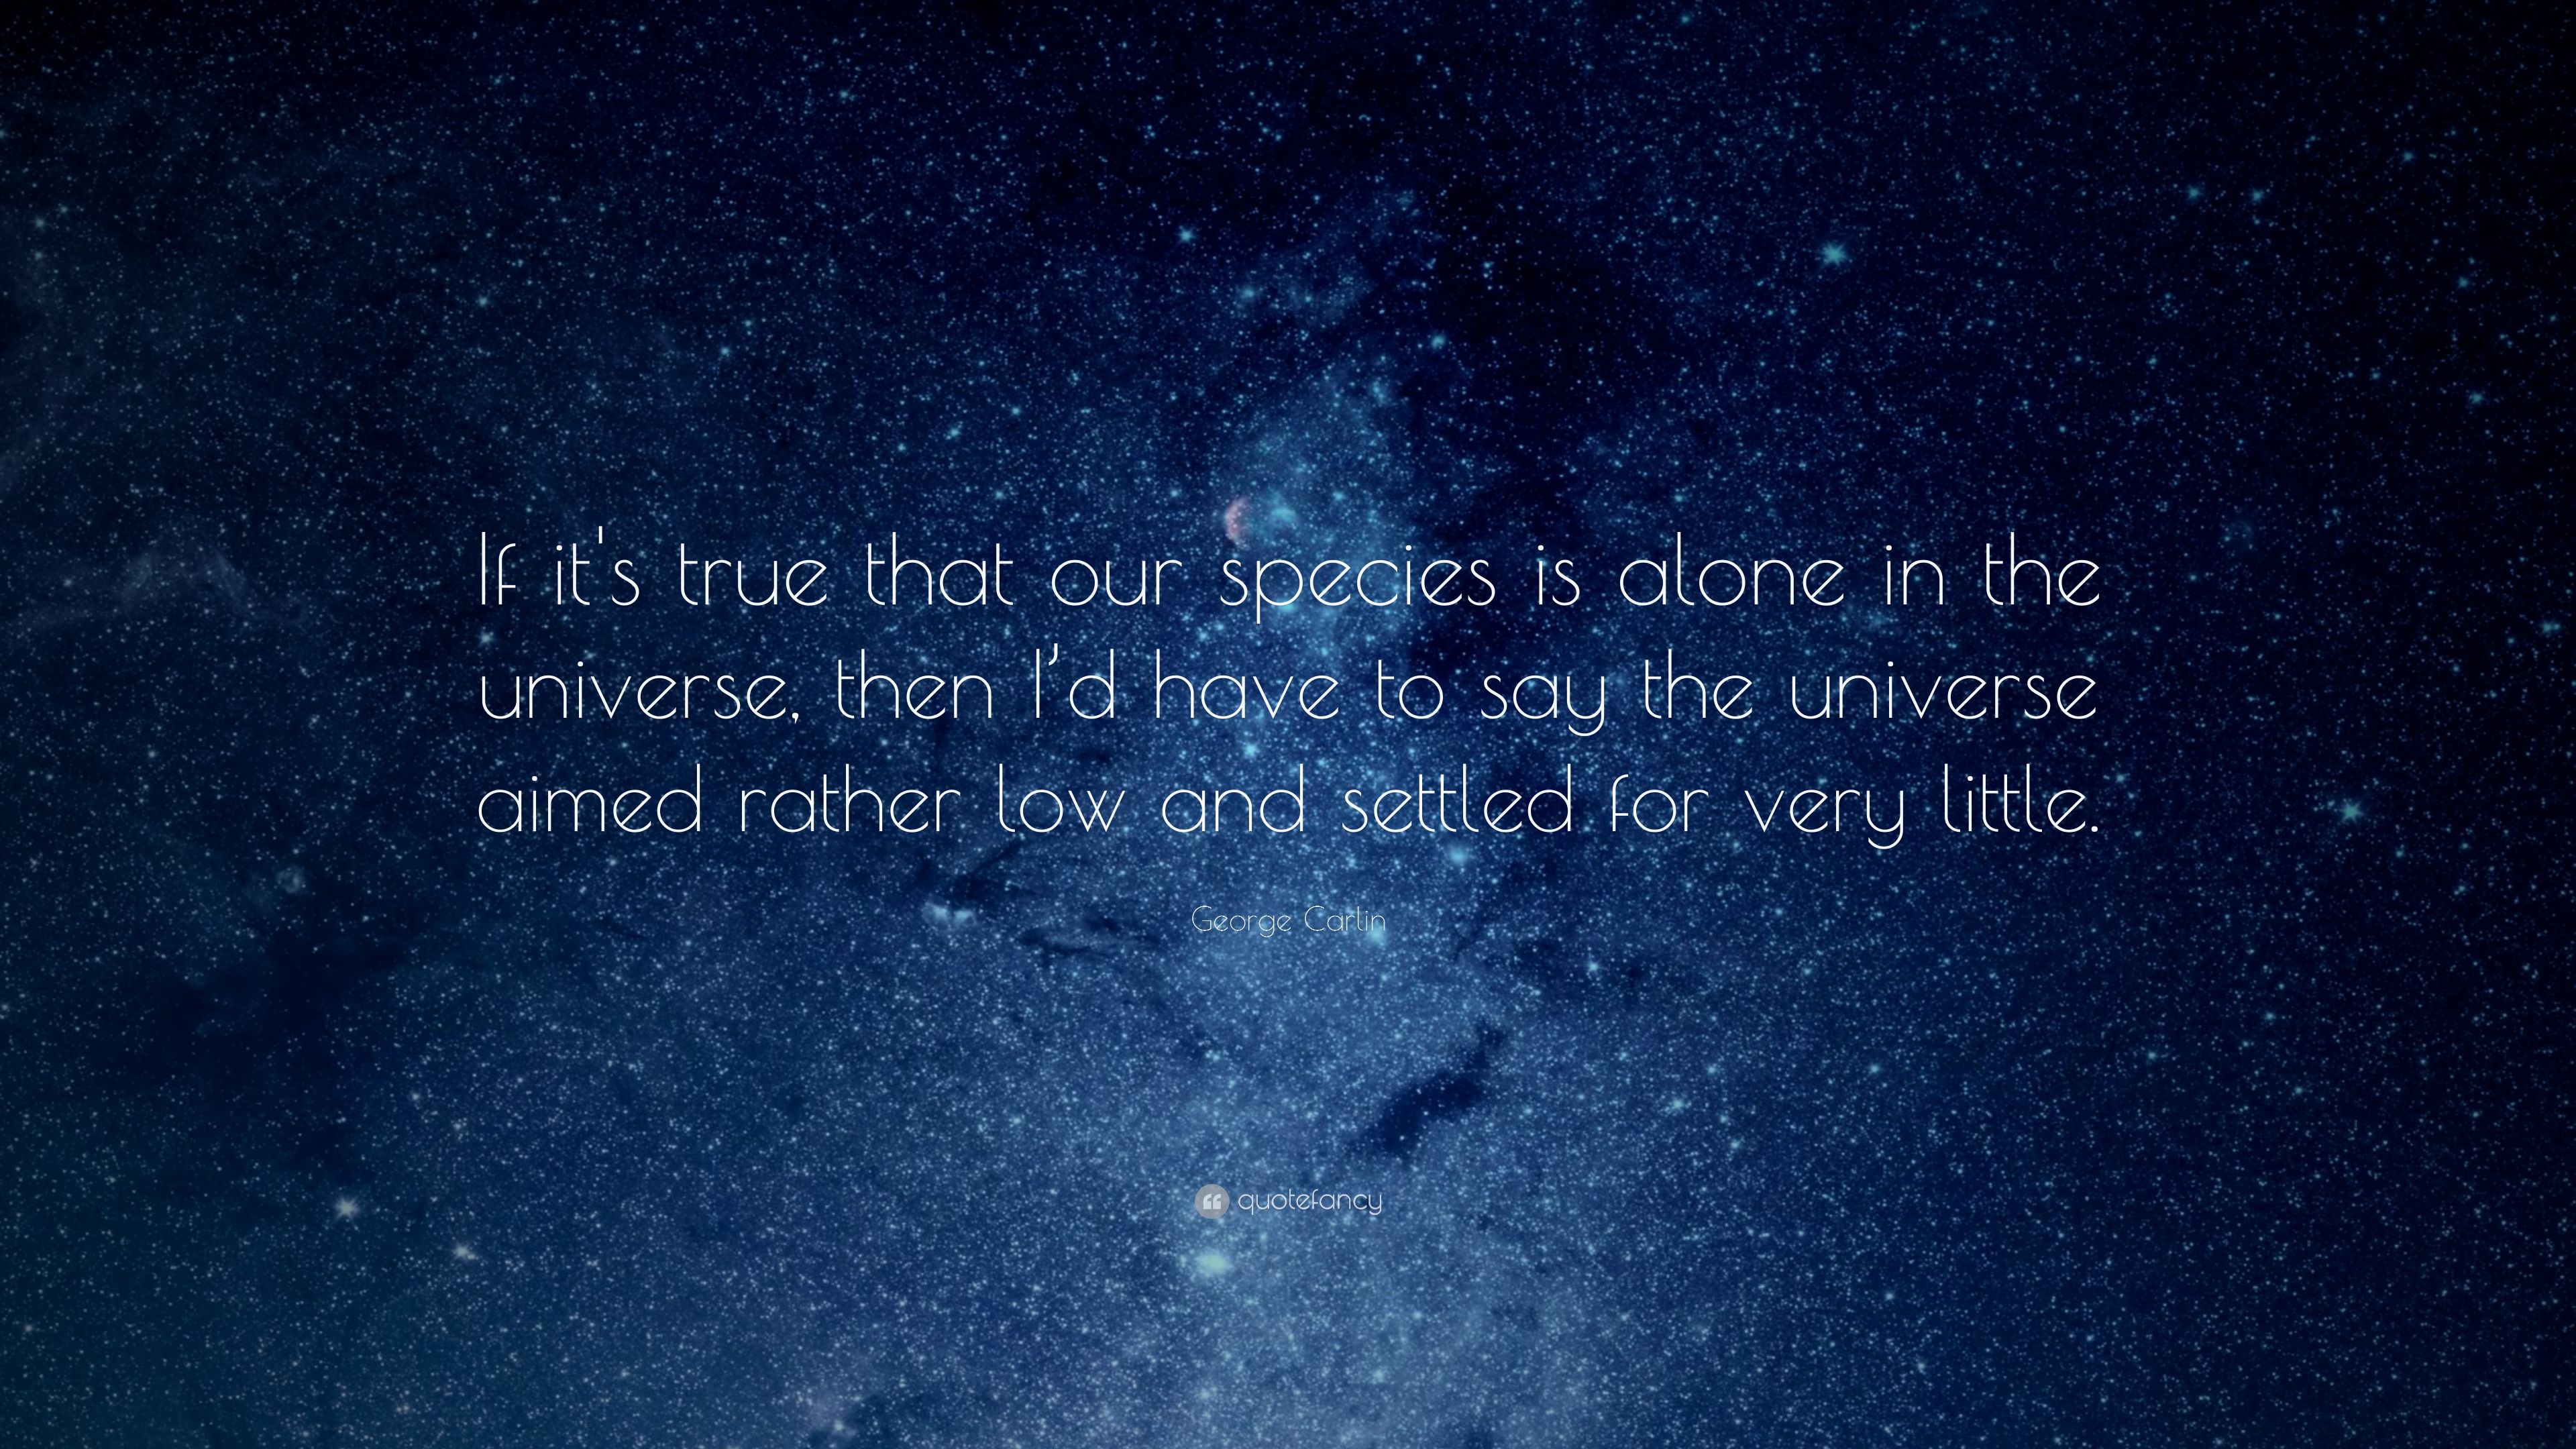 George Carlin Quote: “If it's true that our species is alone